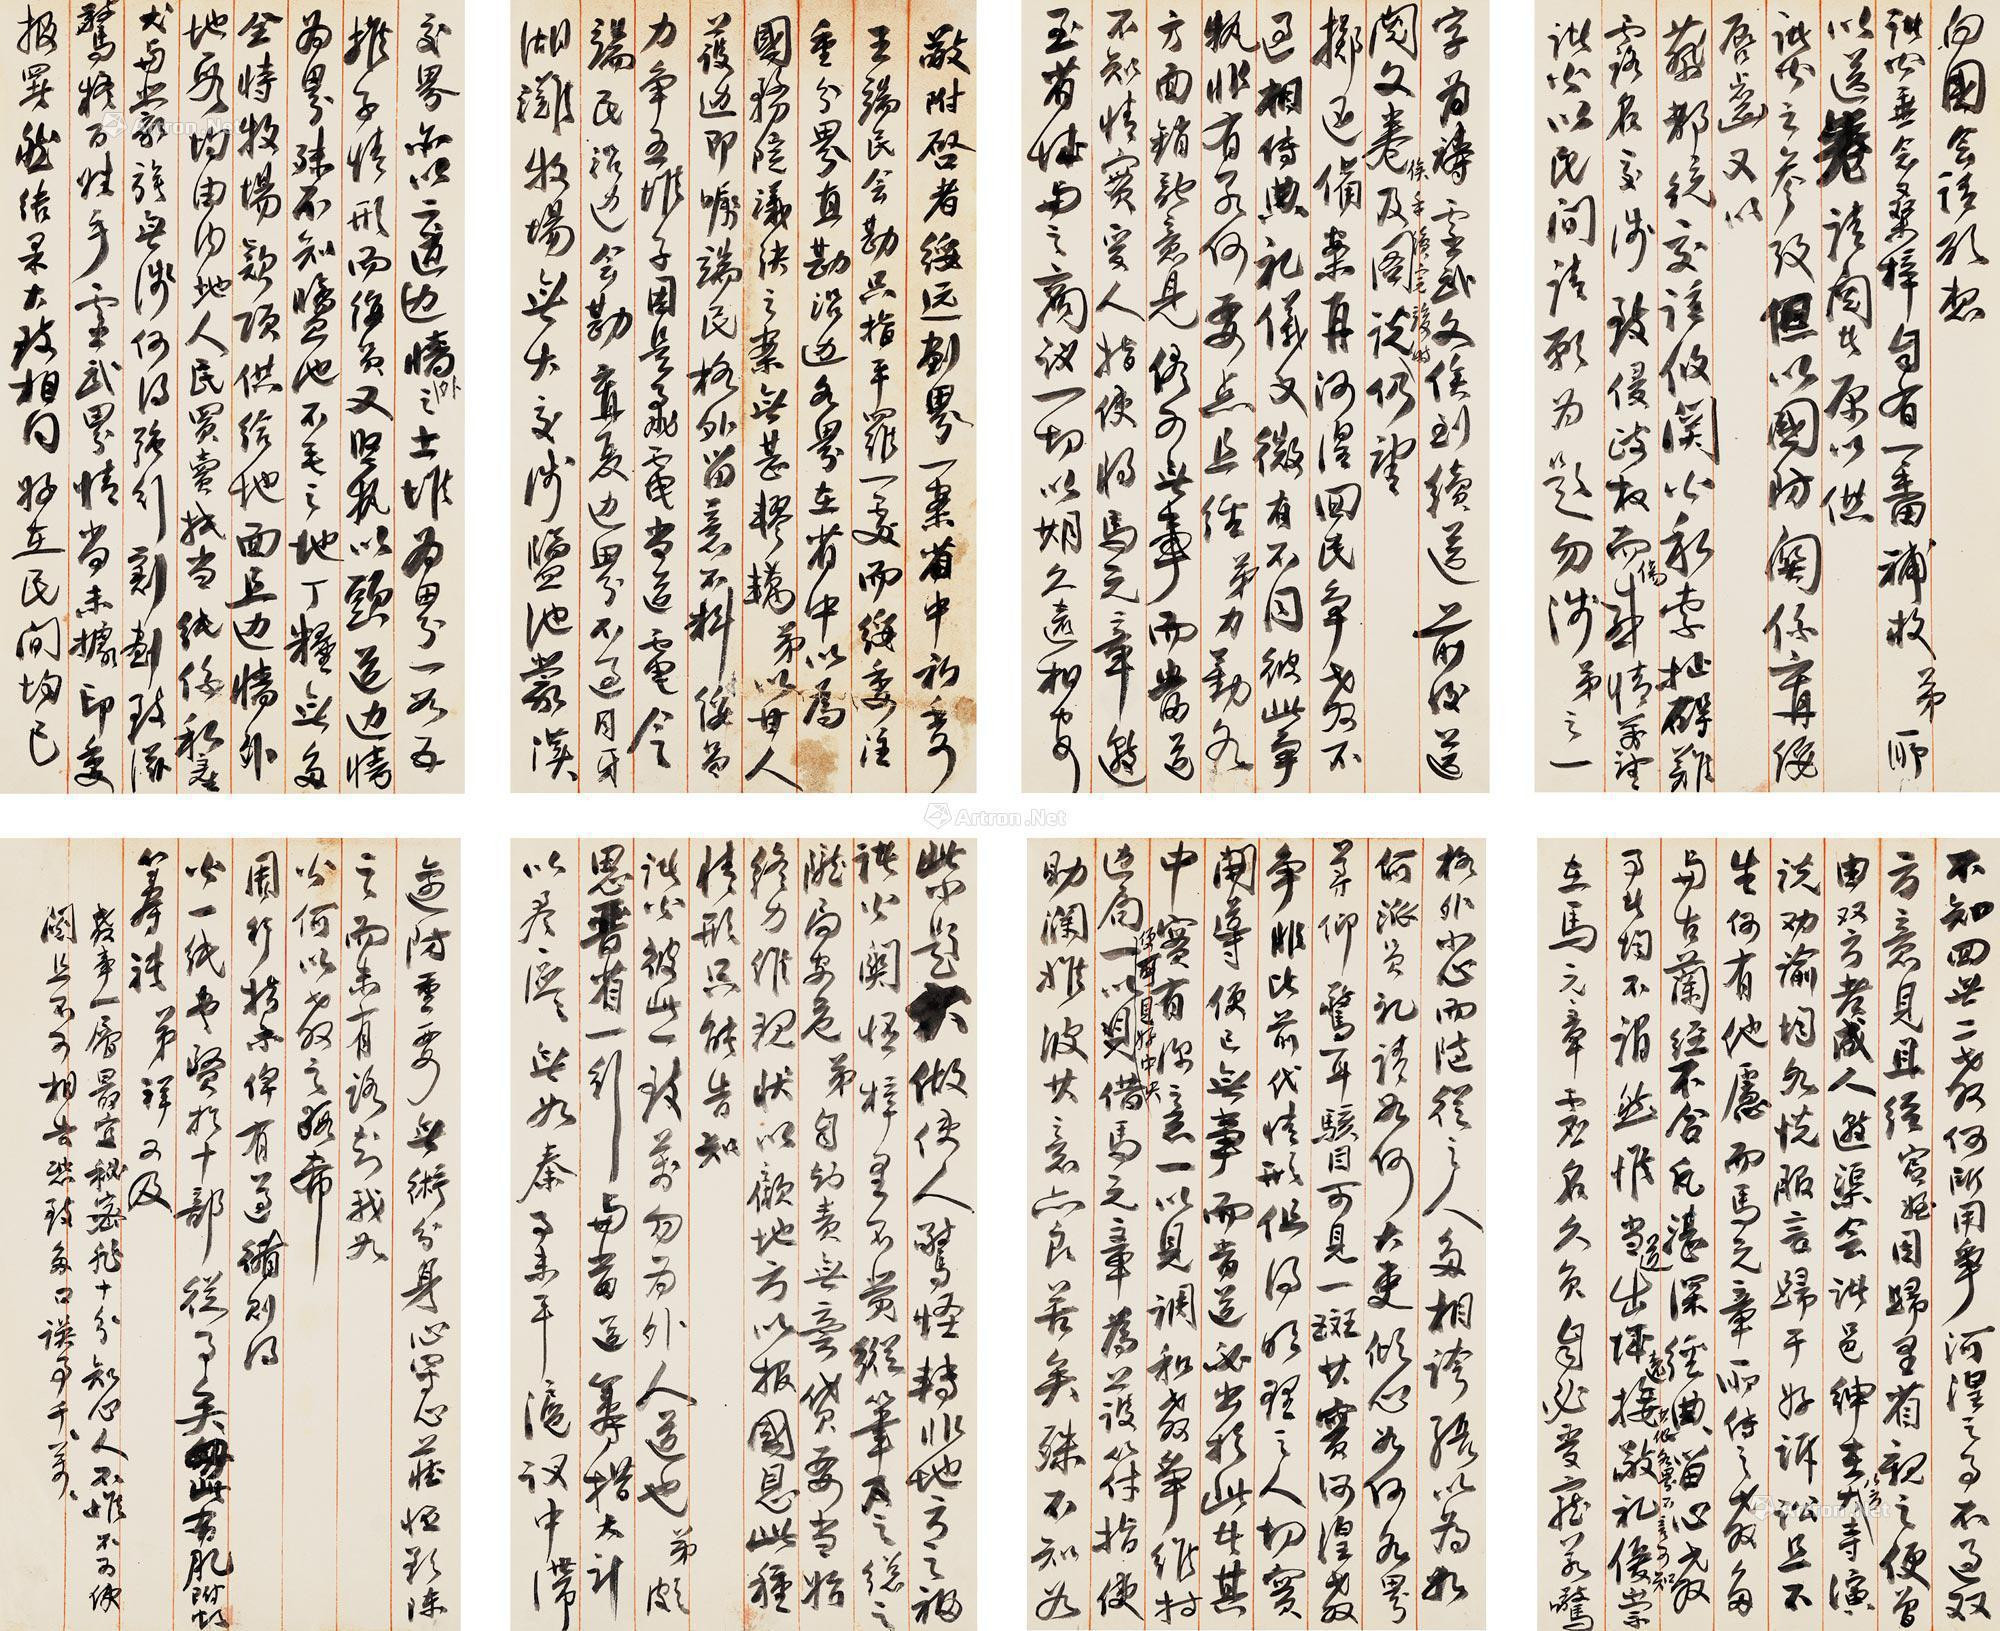 One letter about Petition to Congress of eight pages by Ma Fuxiang to Li Yuanhong